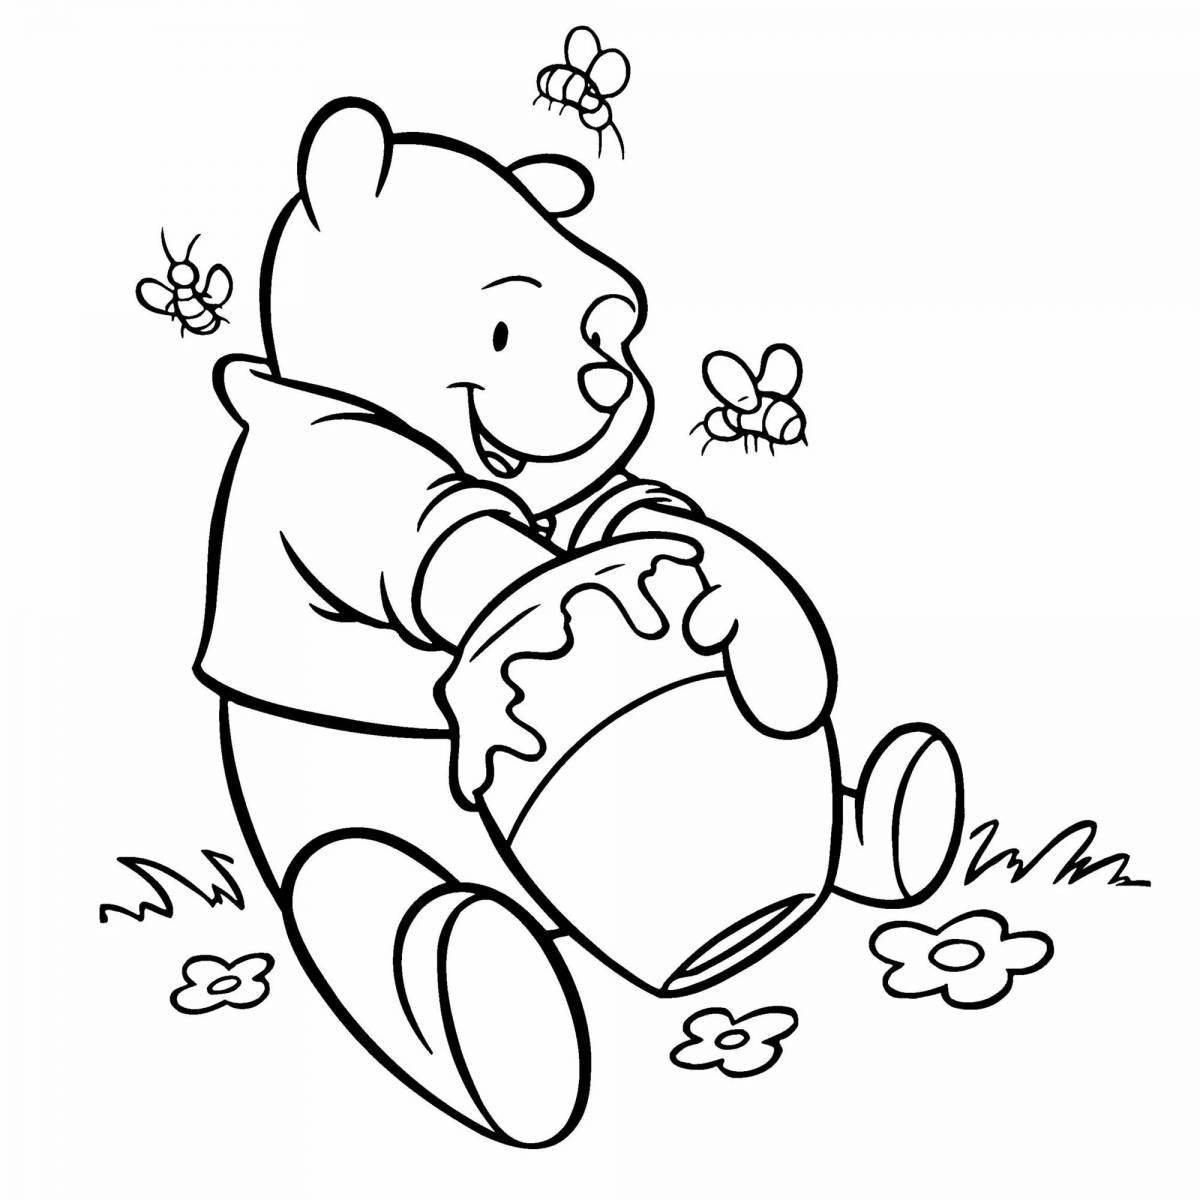 Exciting winnie the pooh coloring book for kids